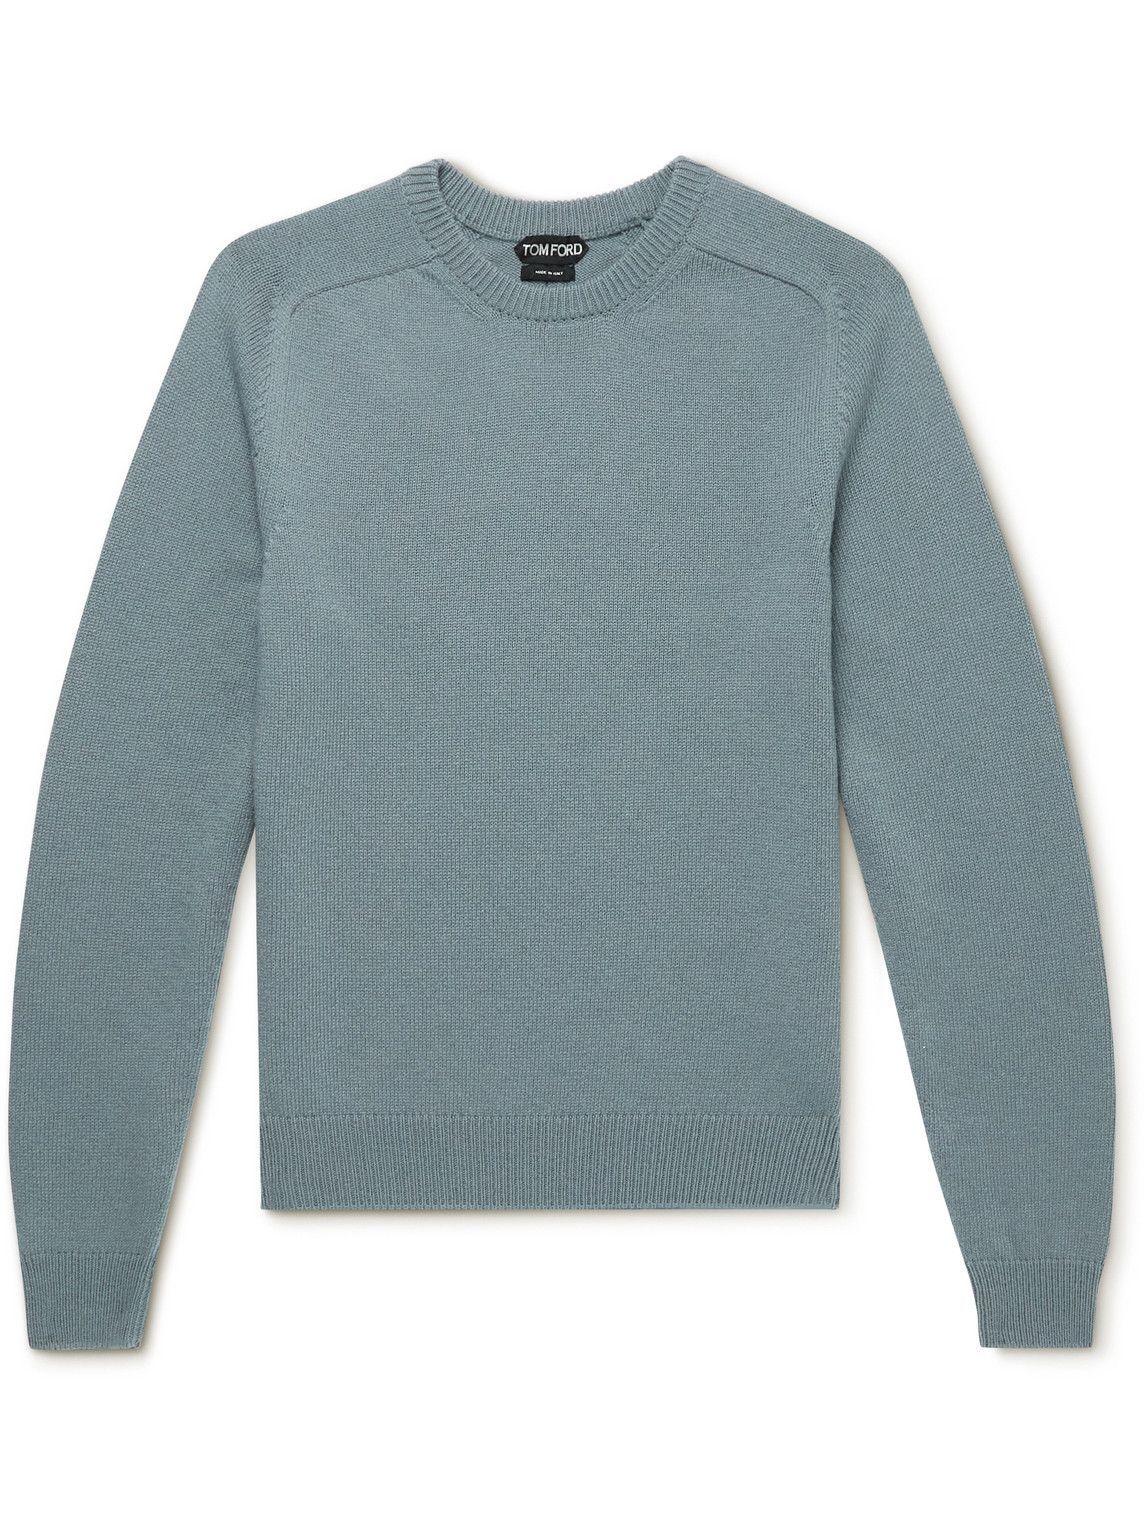 TOM FORD - Cashmere Sweater - Gray TOM FORD